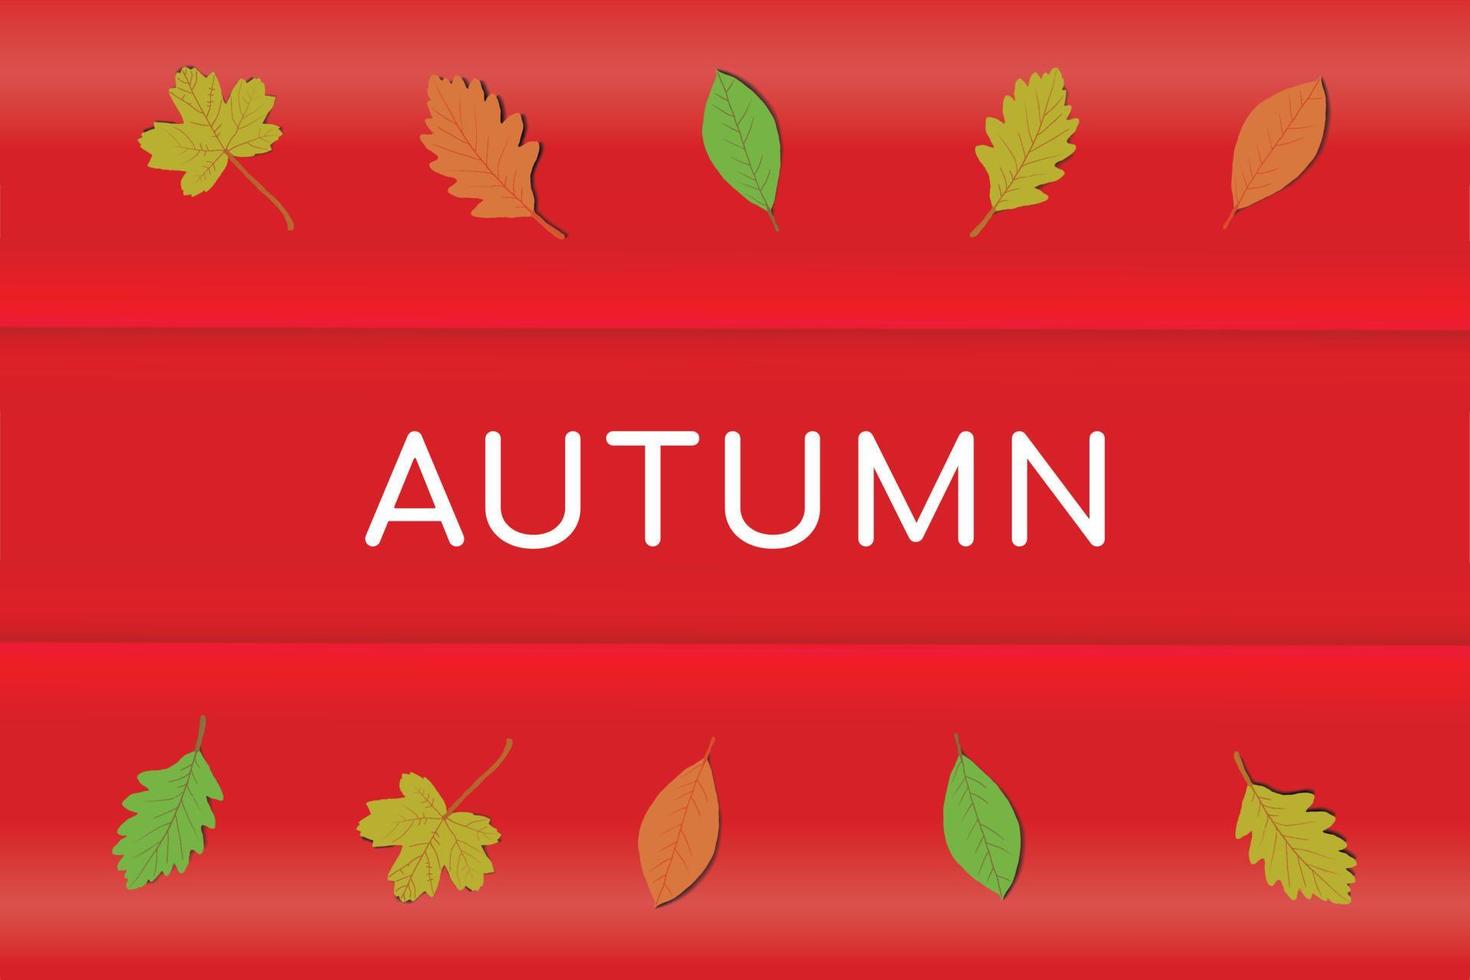 Autumn leaves background graphic vector